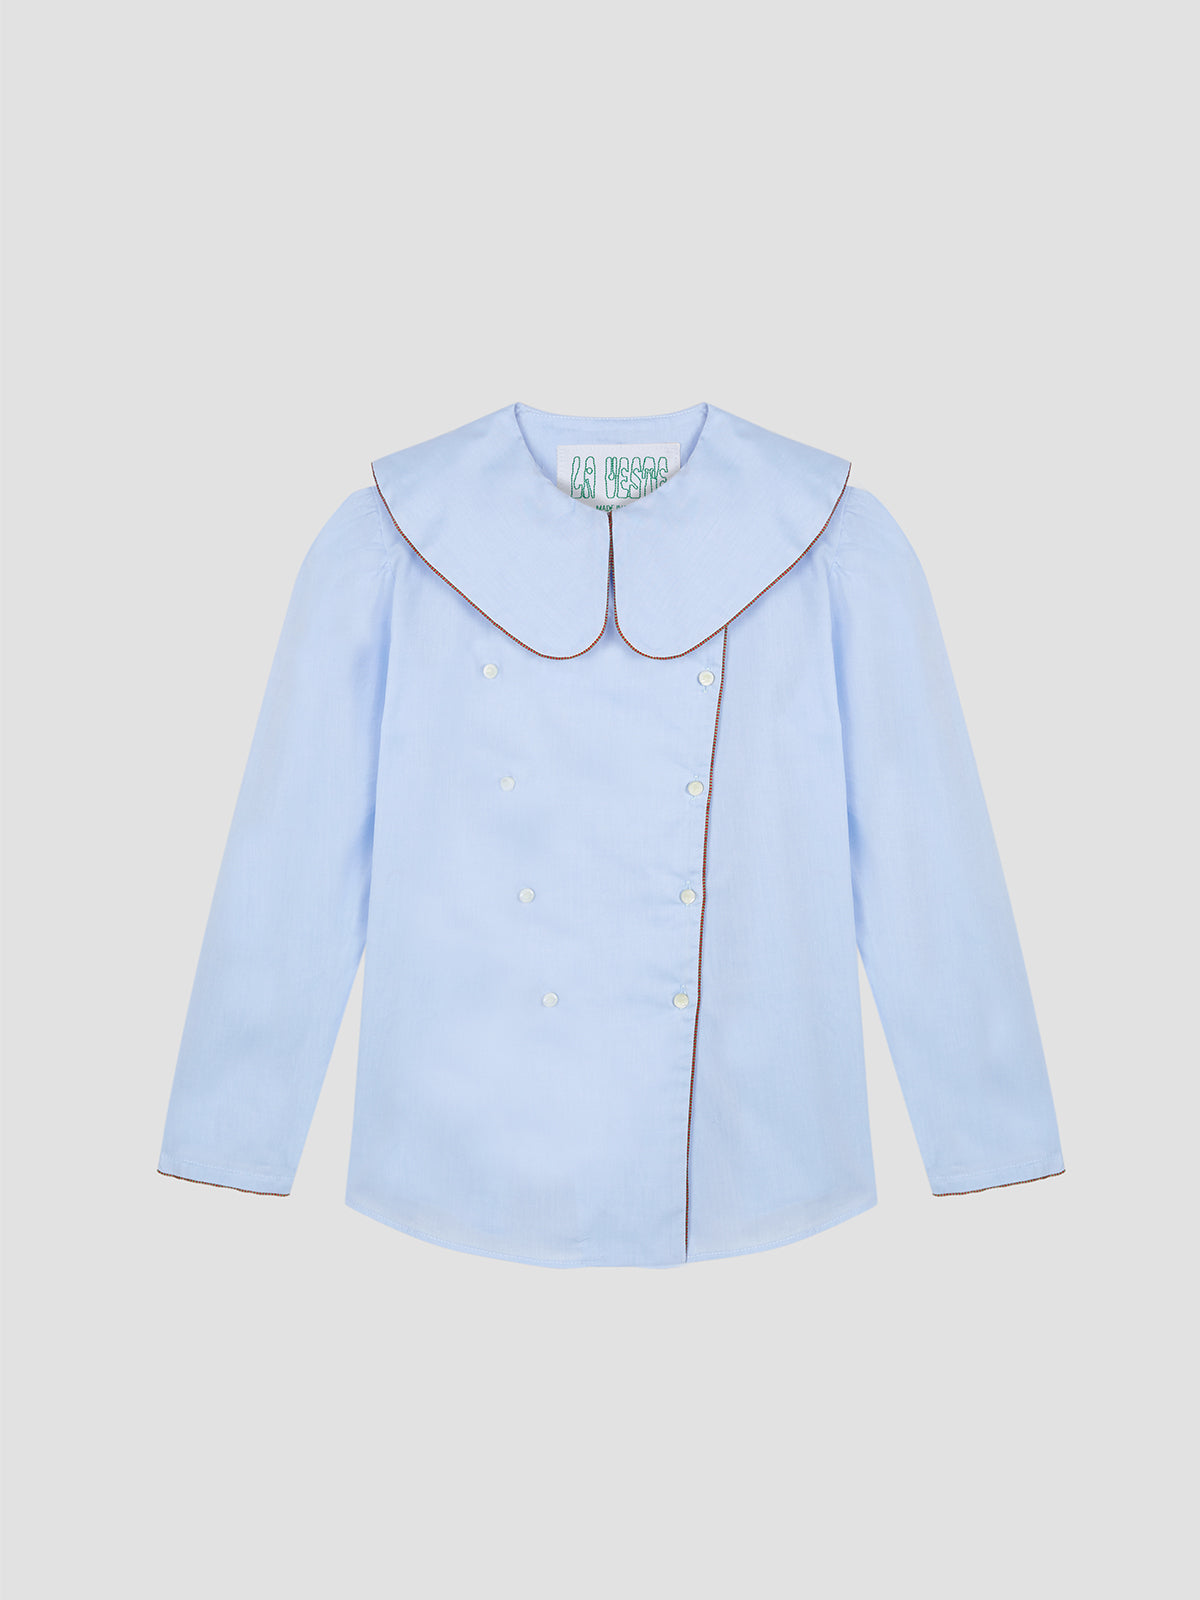 Augusta Shirt Celeste is a blue long sleeve shirt with brown piping details and white button closure.